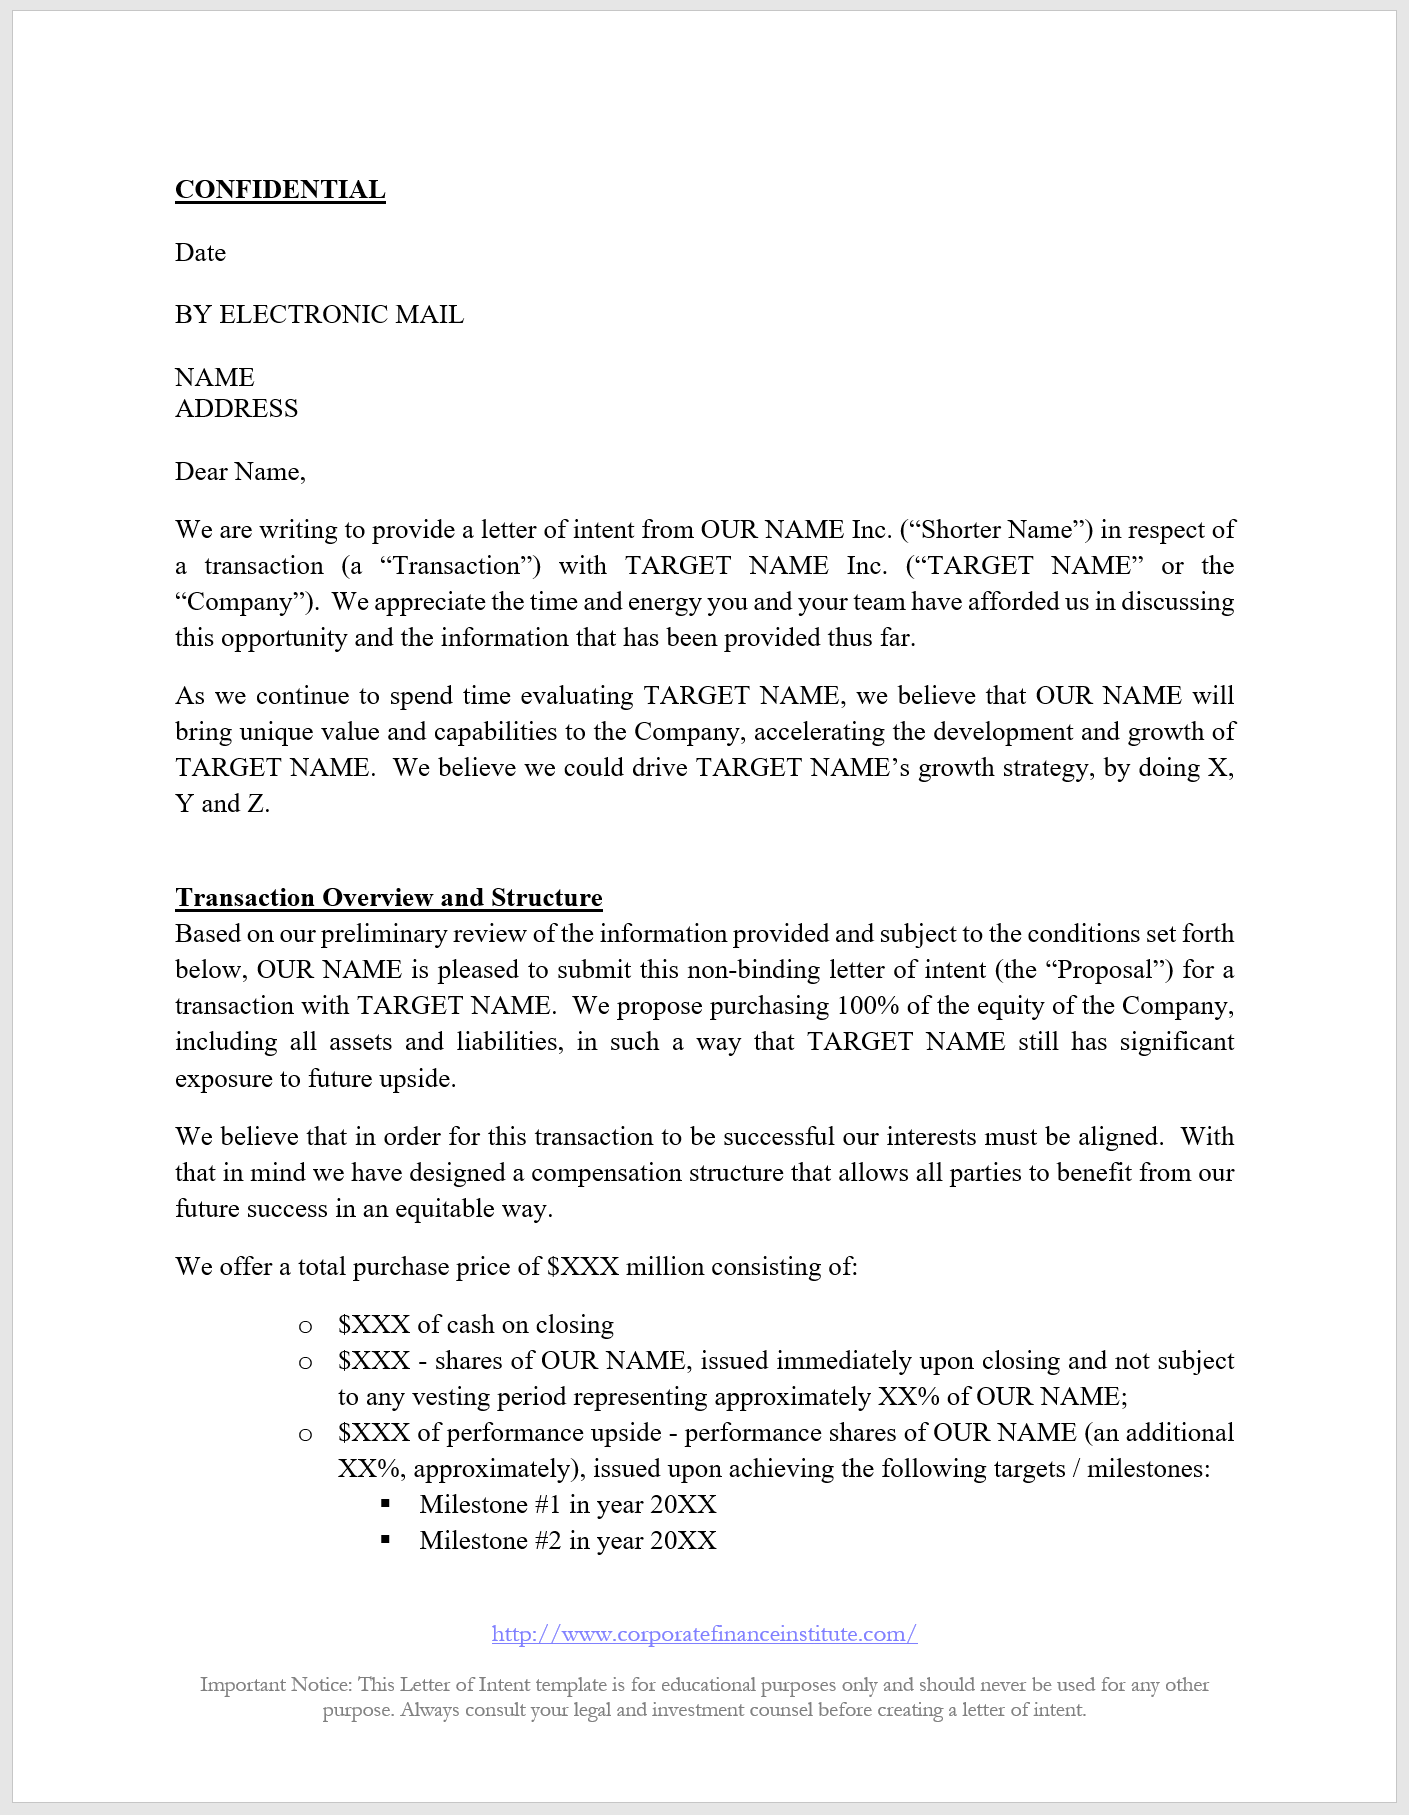 Sample Letter To Lawyer Requesting Services from corporatefinanceinstitute.com